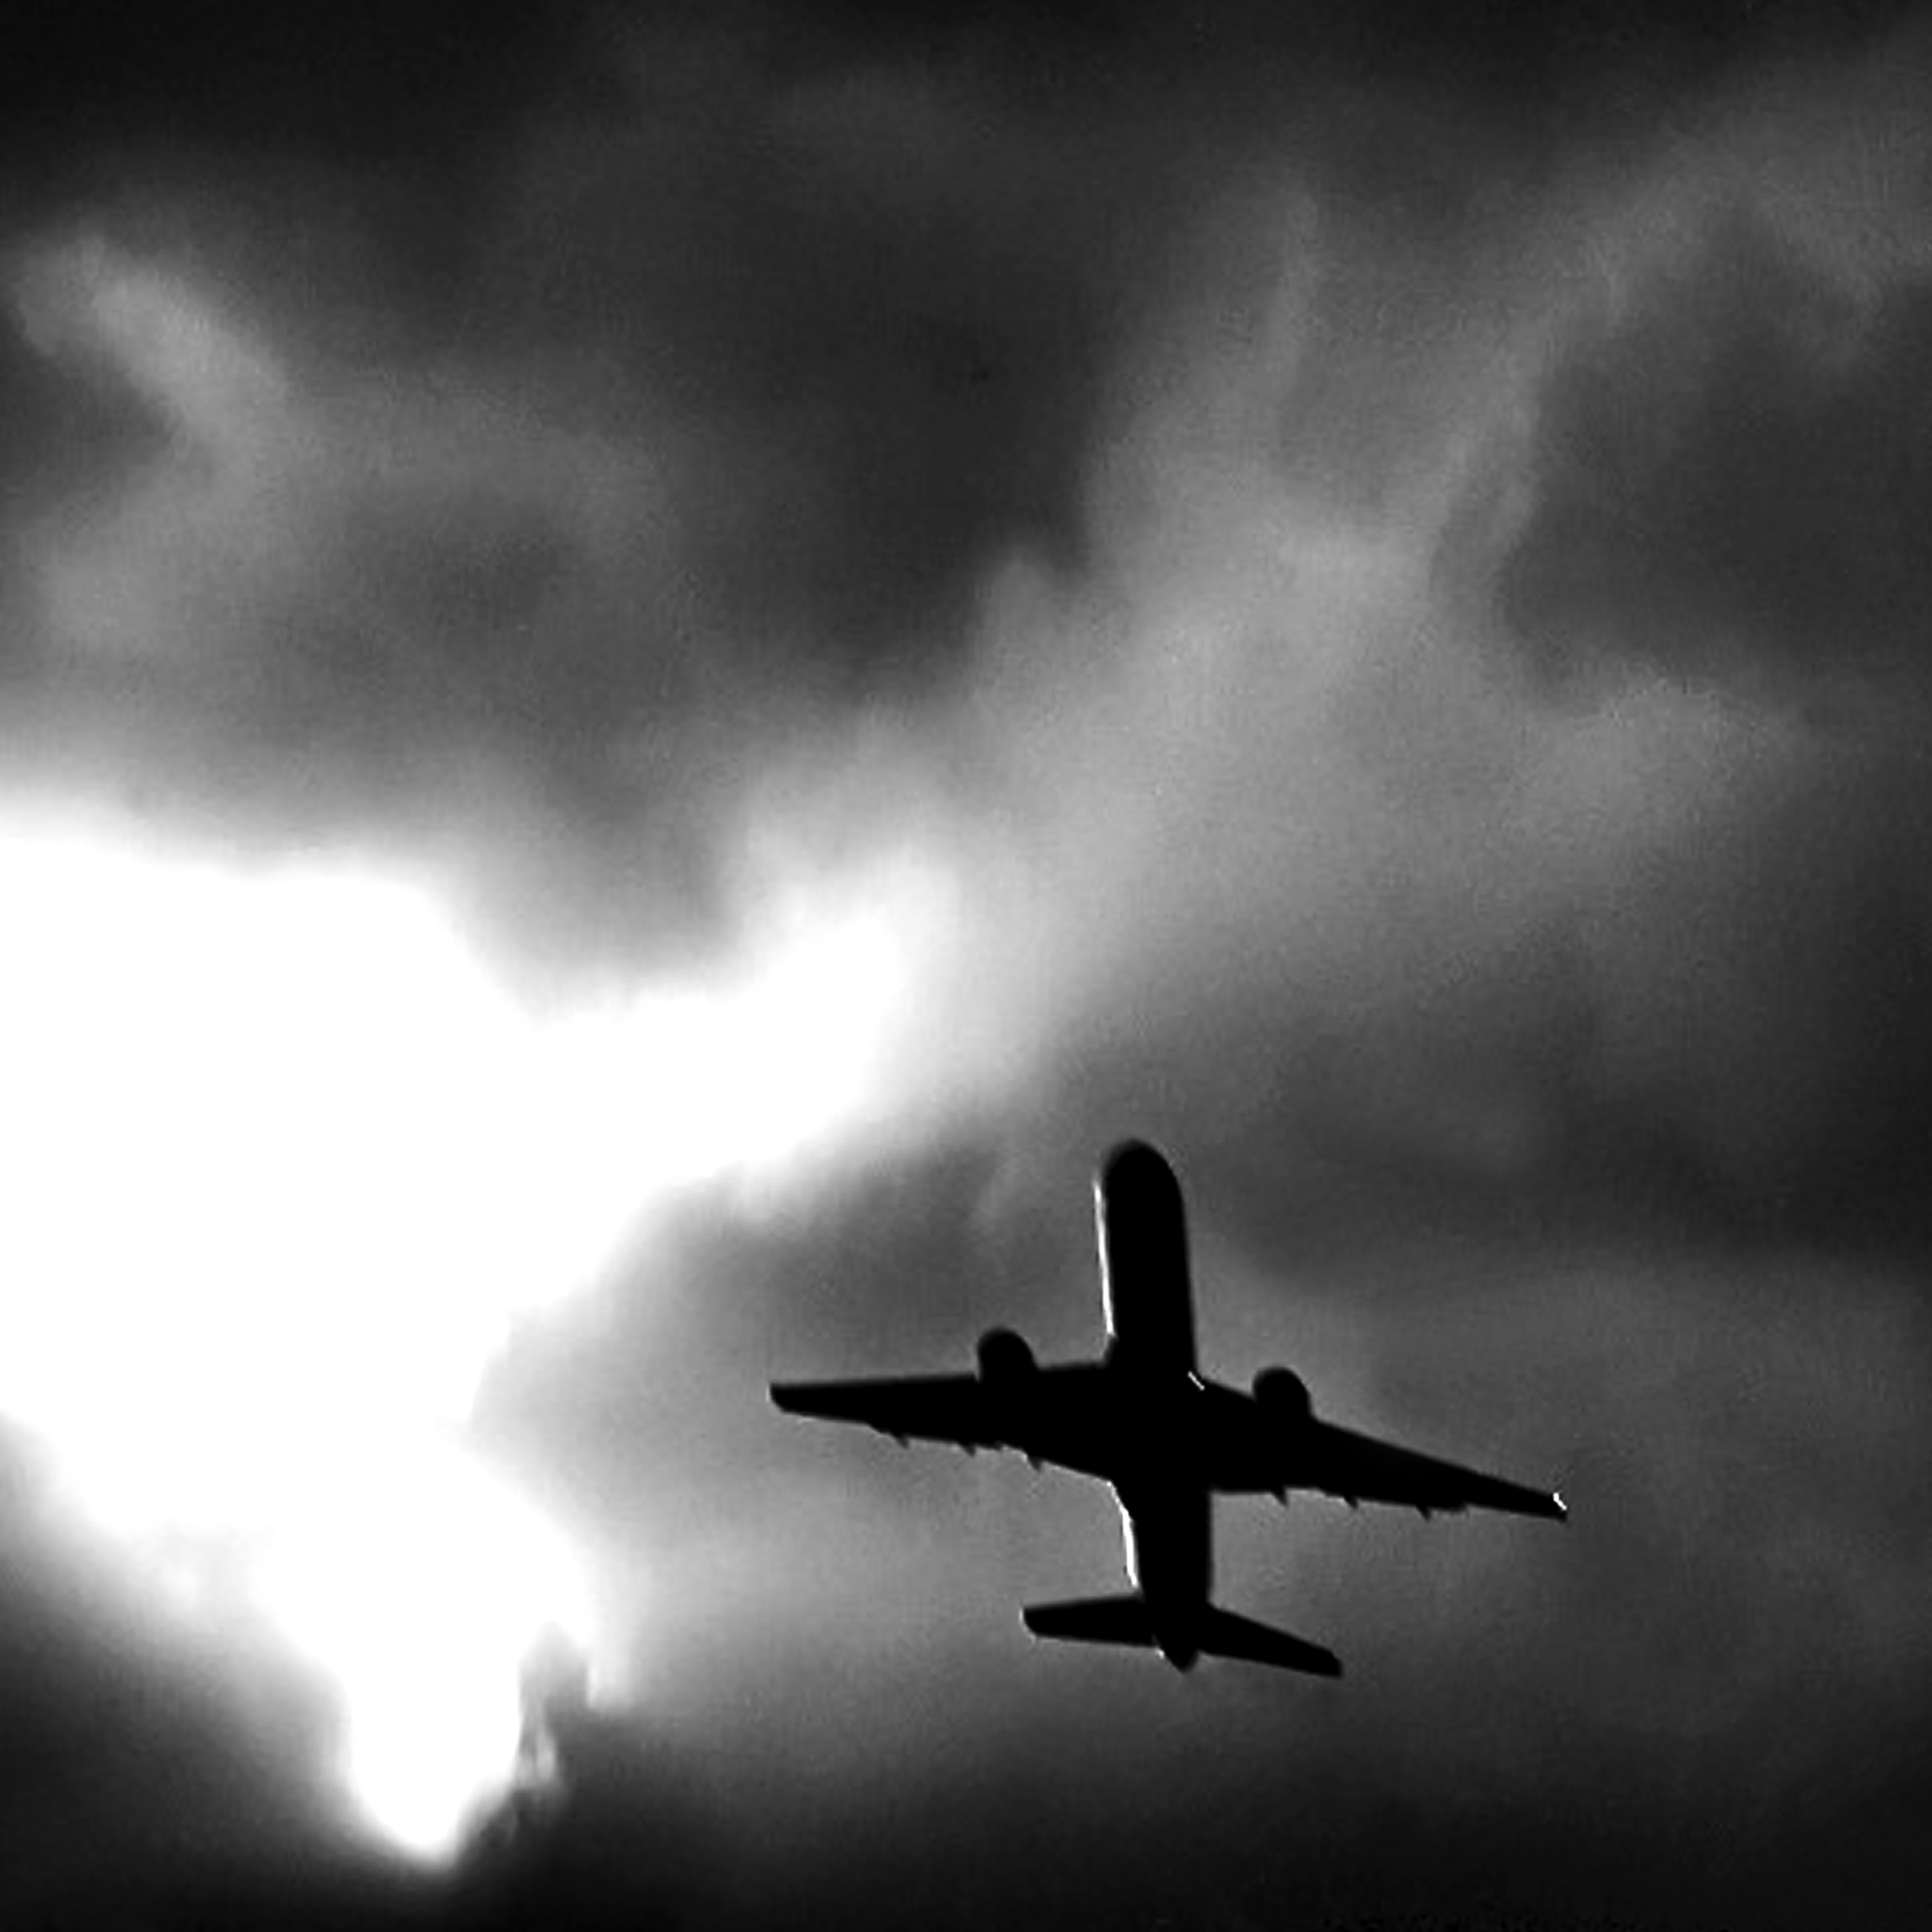 Frank Schramm, Boeing 727 on takeoff from National Airport, Washington DC, December 2, 1992
Printed on silver bromide archival black and white photographic paper
75 x 75 cm / Edition of 10 
50 x 60 cm / Edition of 20